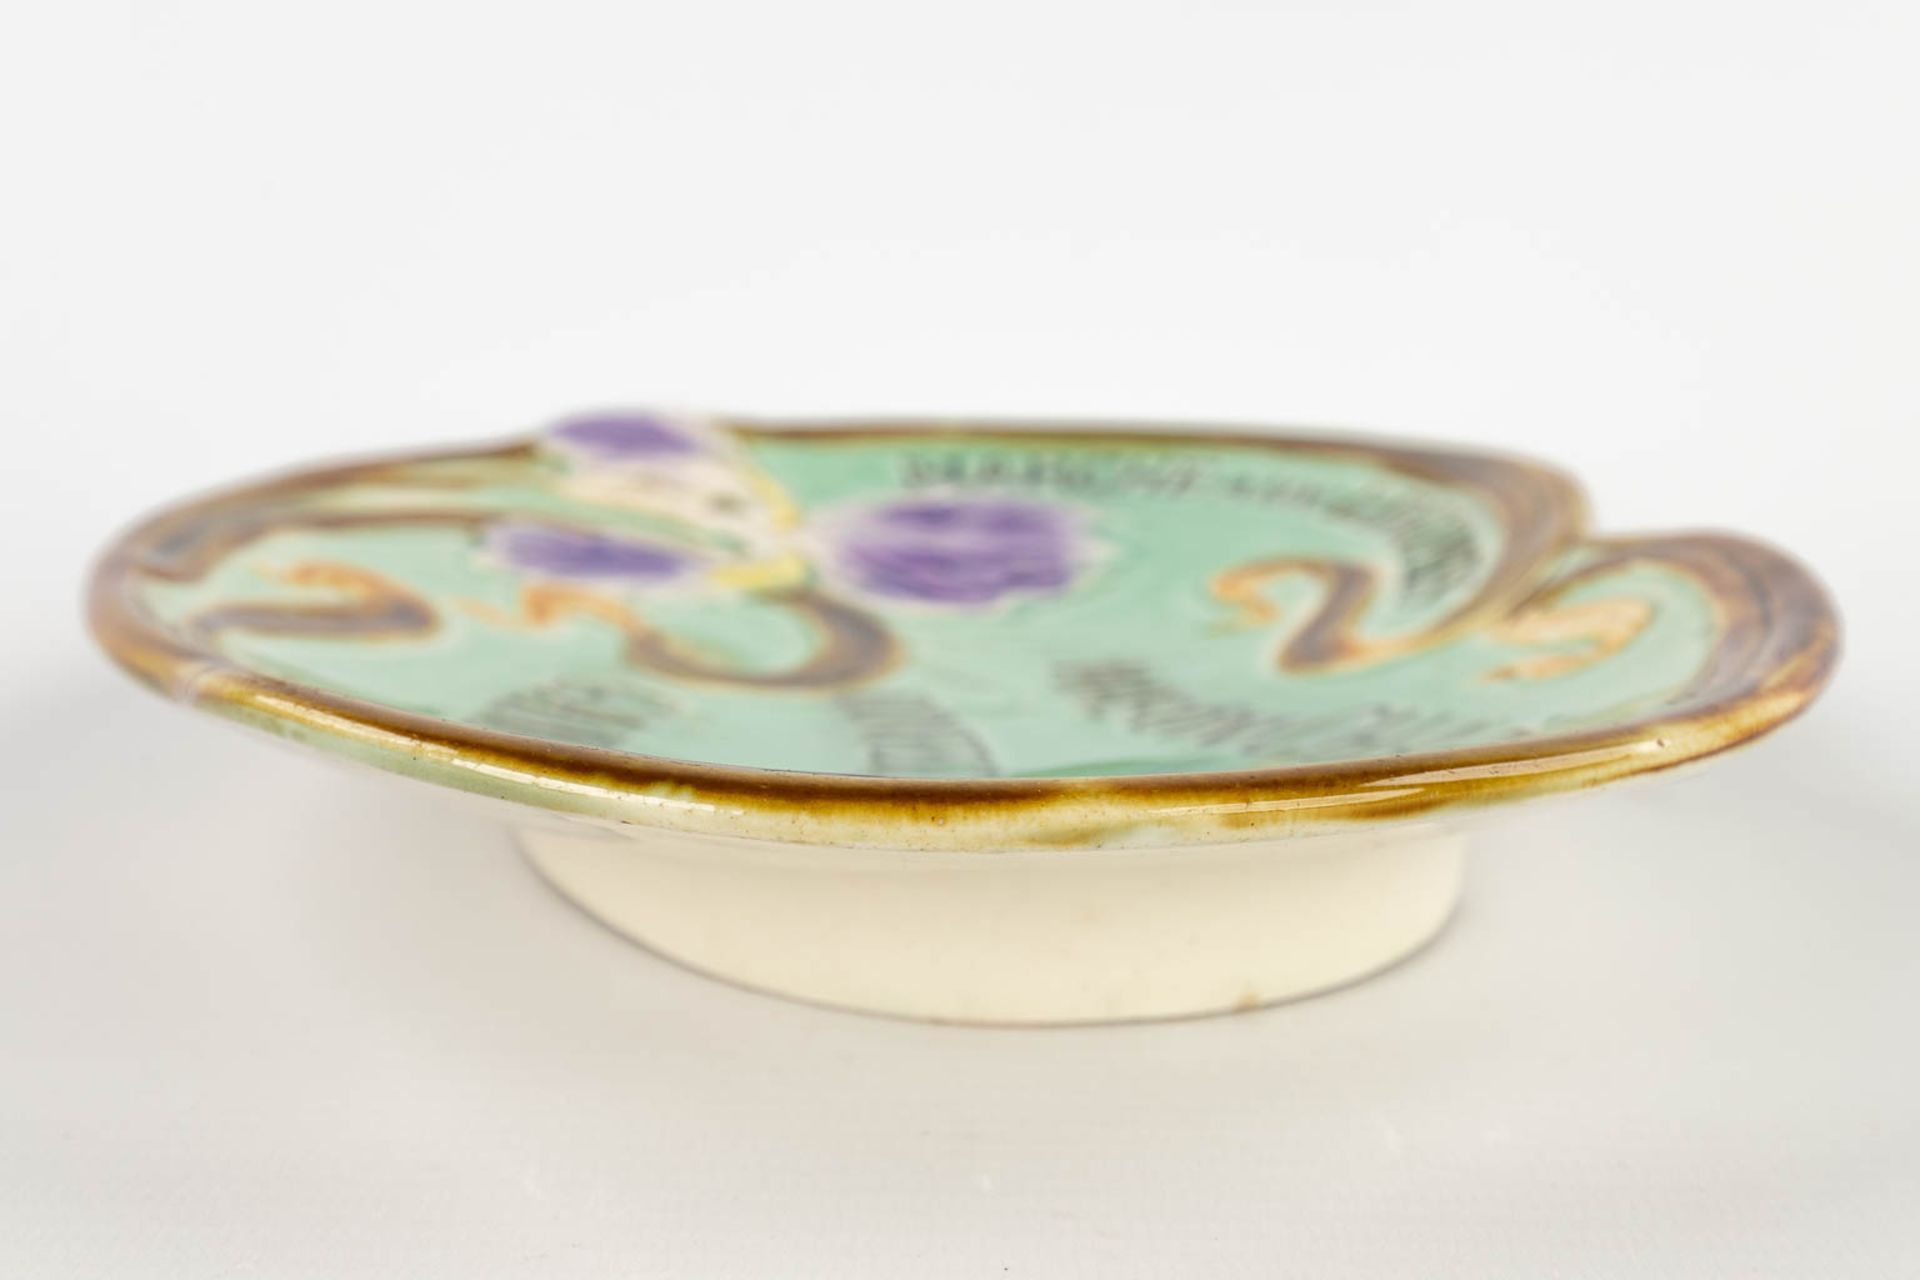 Hasselts Faience, a bowl ?Maison Charles? Confections Gand, Belgium, 19th C. (D:20 x W:26 x H:3,5 cm - Image 6 of 7